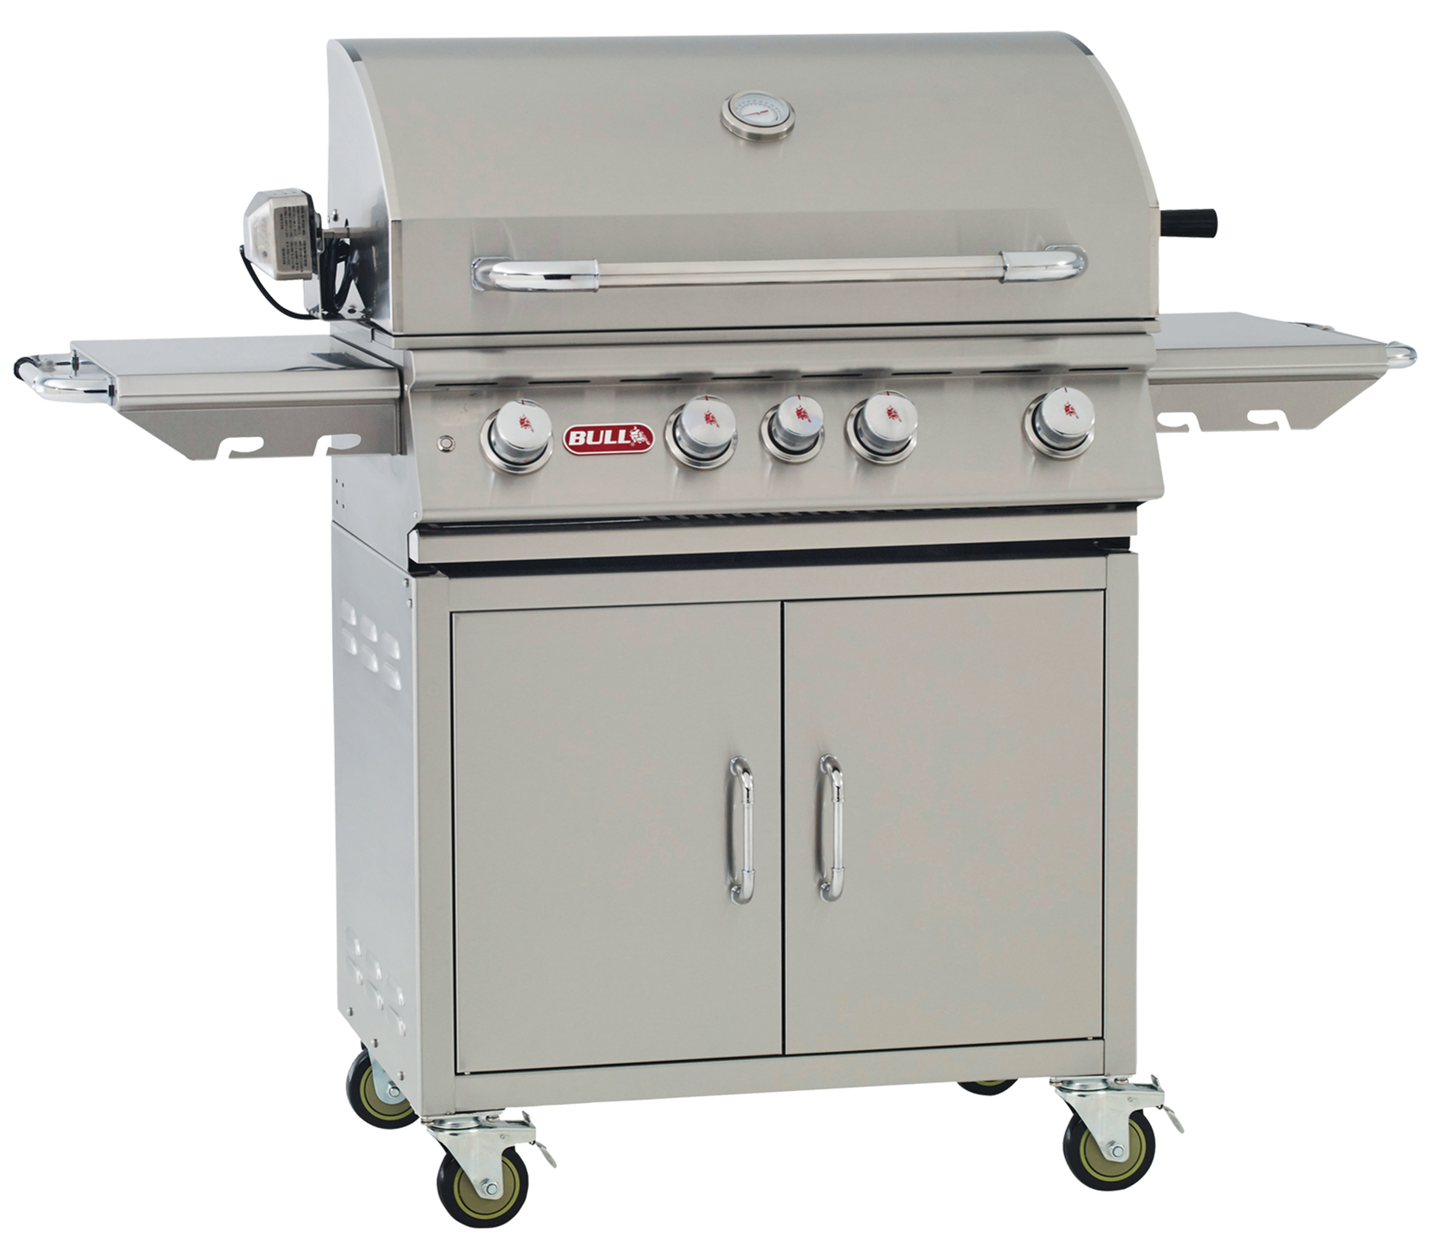 Bull Angus 30 Inch Natural Gas Grill on Cart